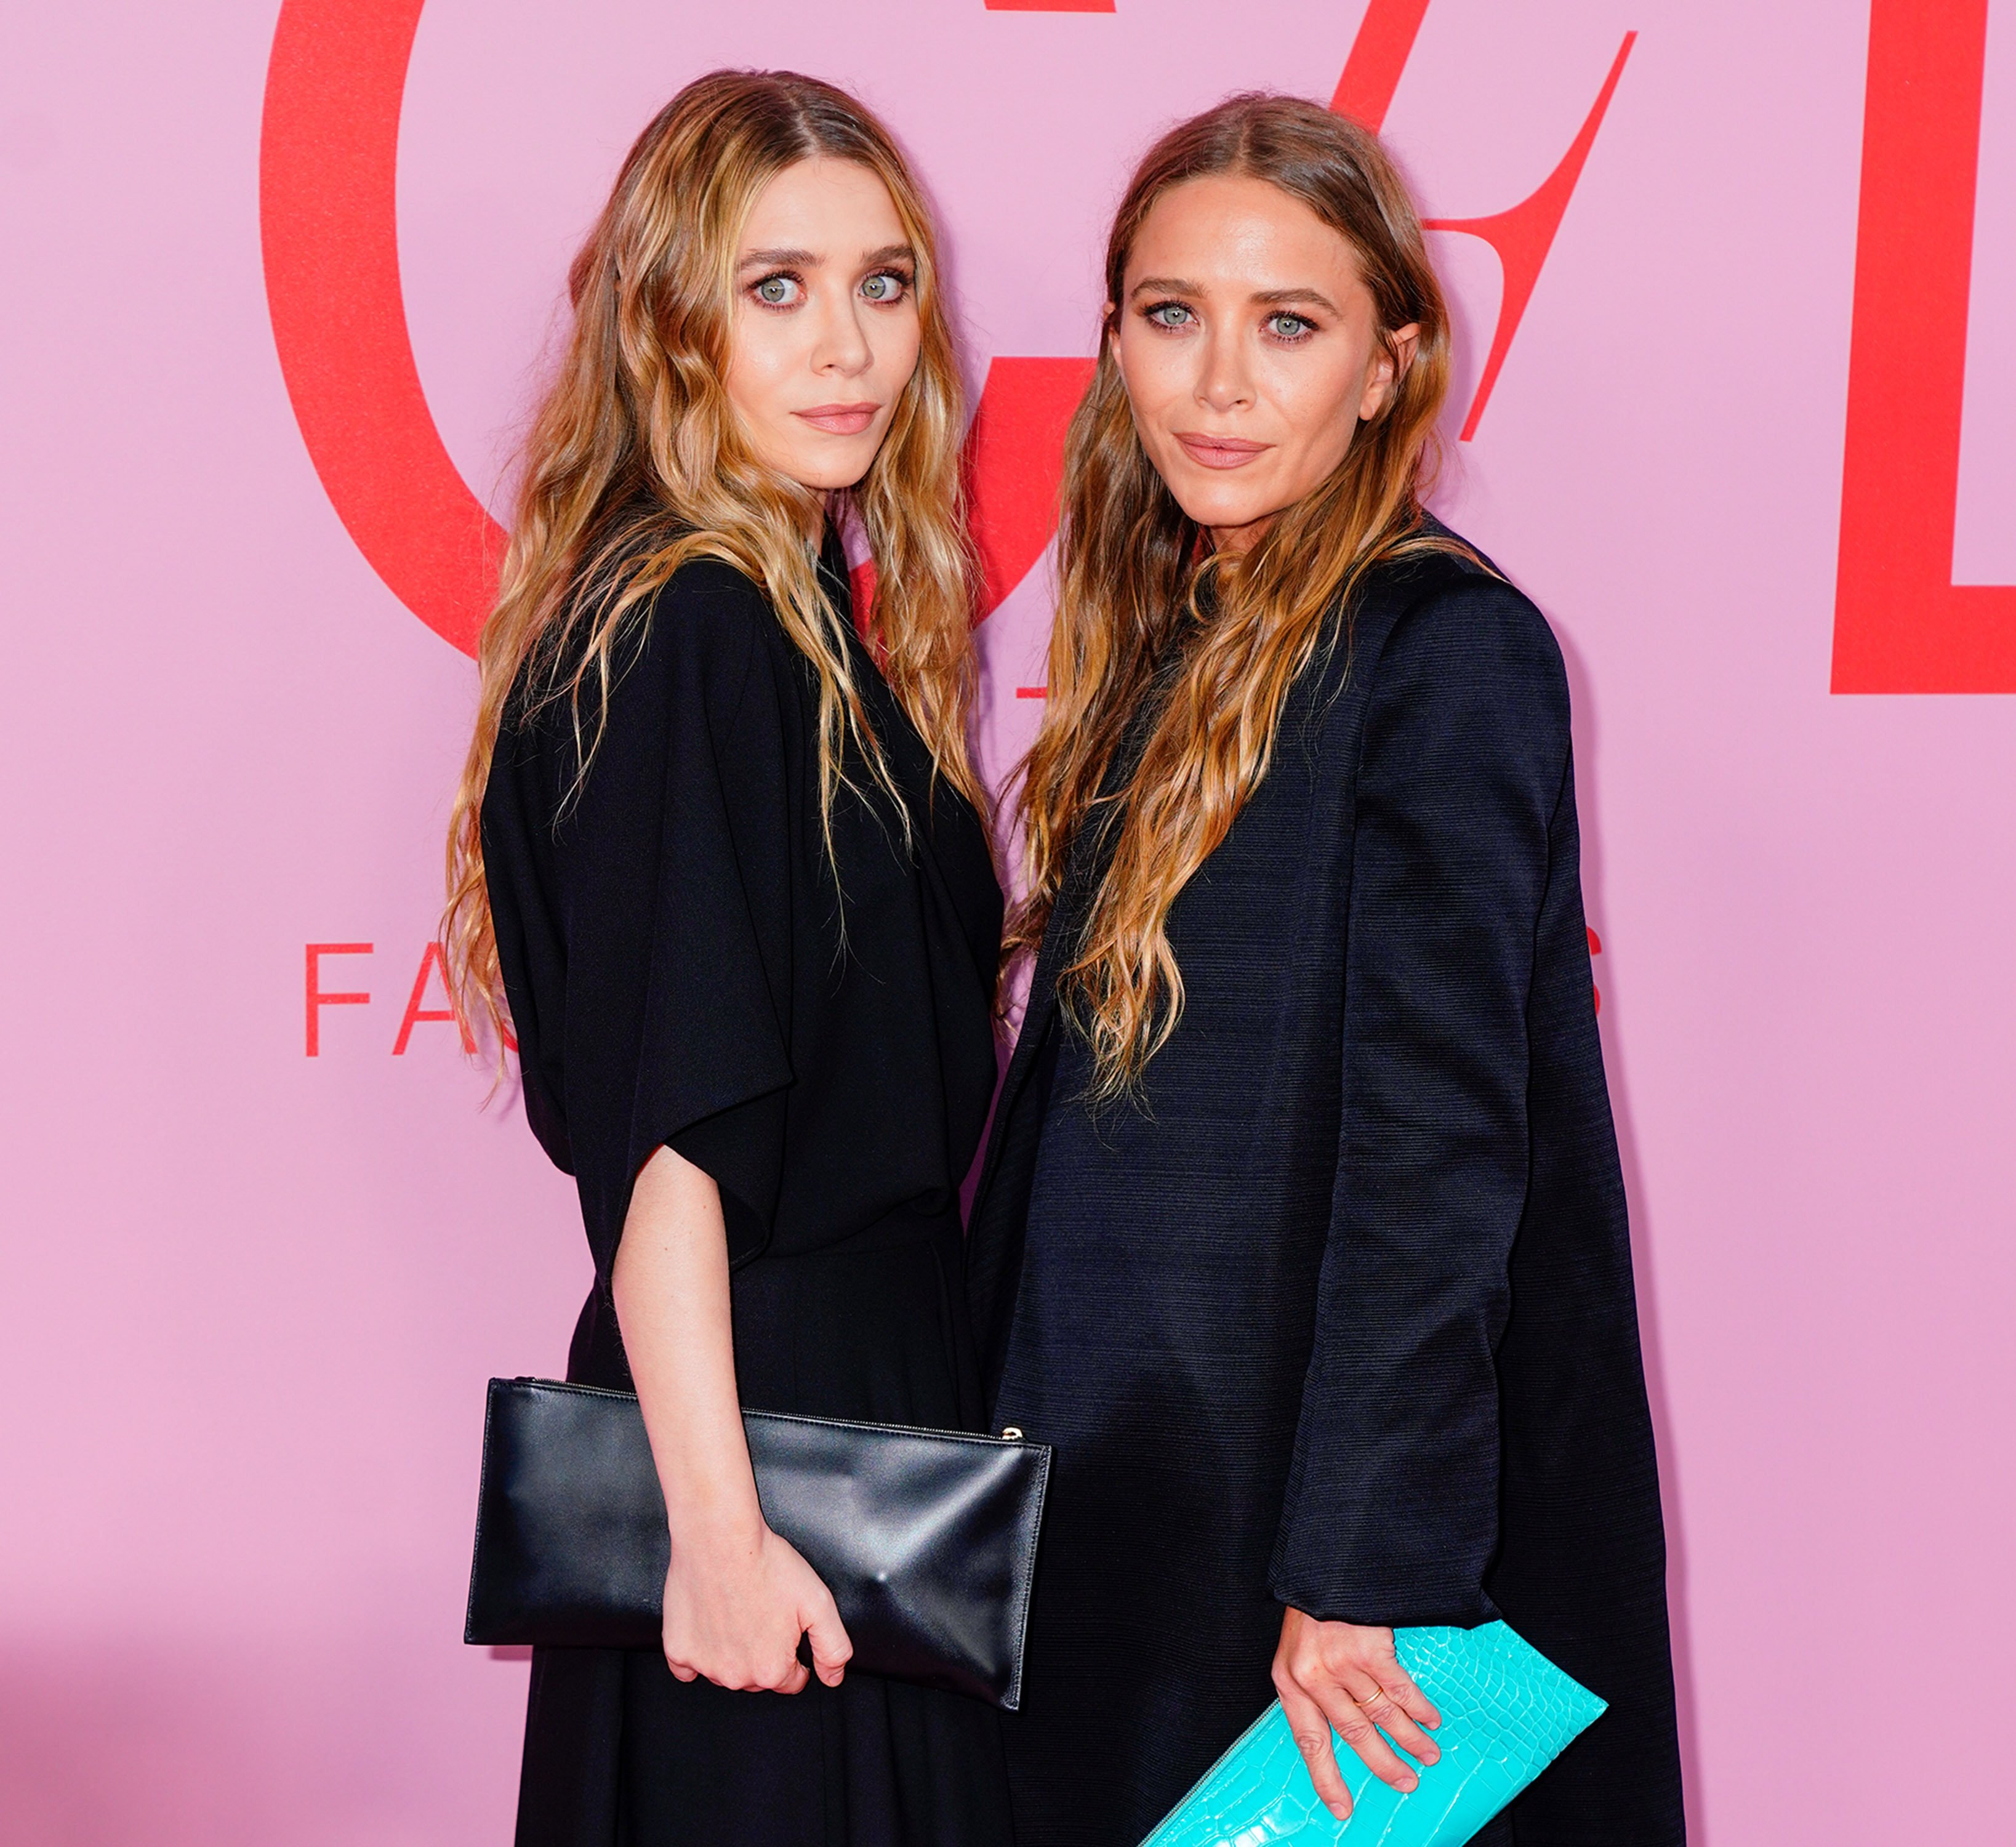 Mary-Kate and Ashley Olsen rose to prominence after starring in a series of films and TV shows as child stars. Photo: Getty Images